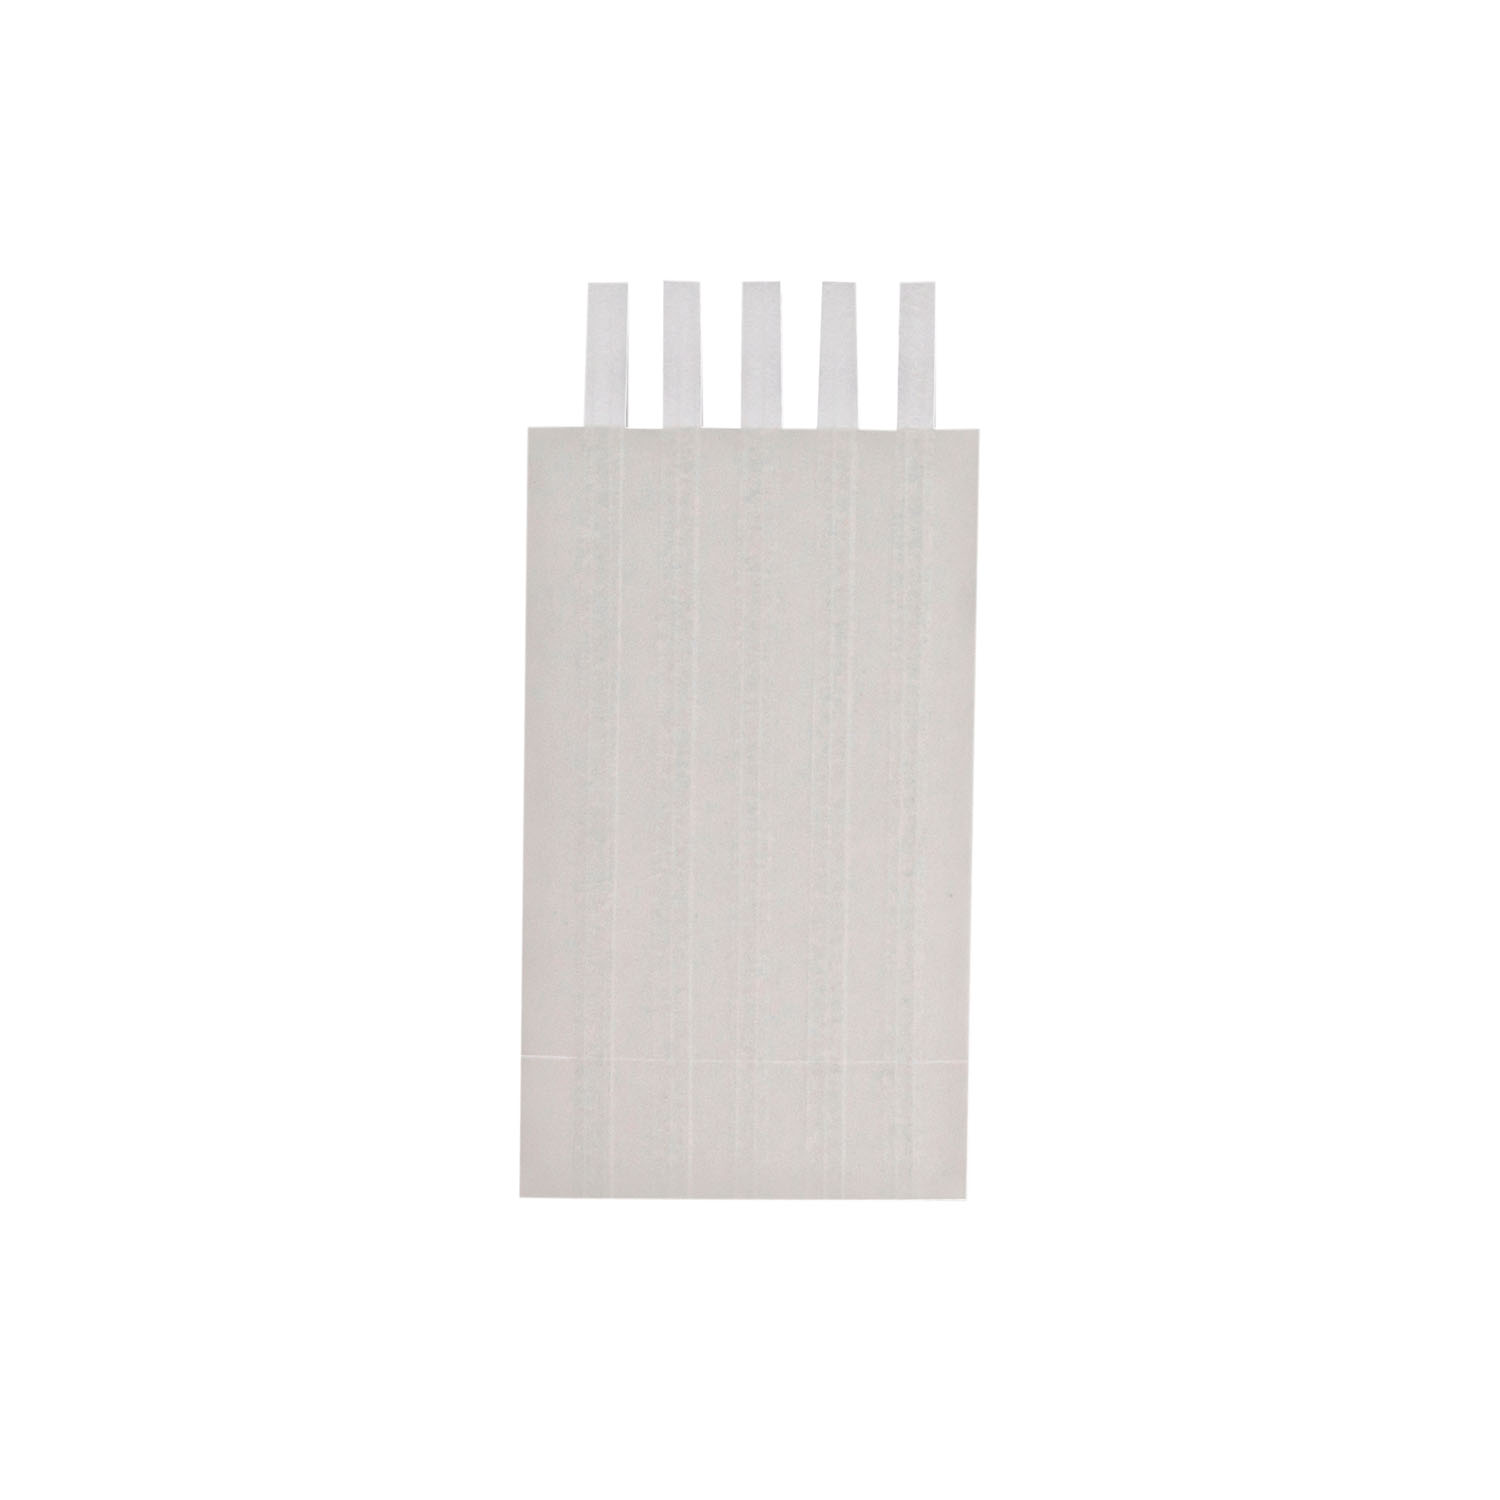 DUKAL WOUND CLOSURE STRIPS : 5150 BX $41.05 Stocked